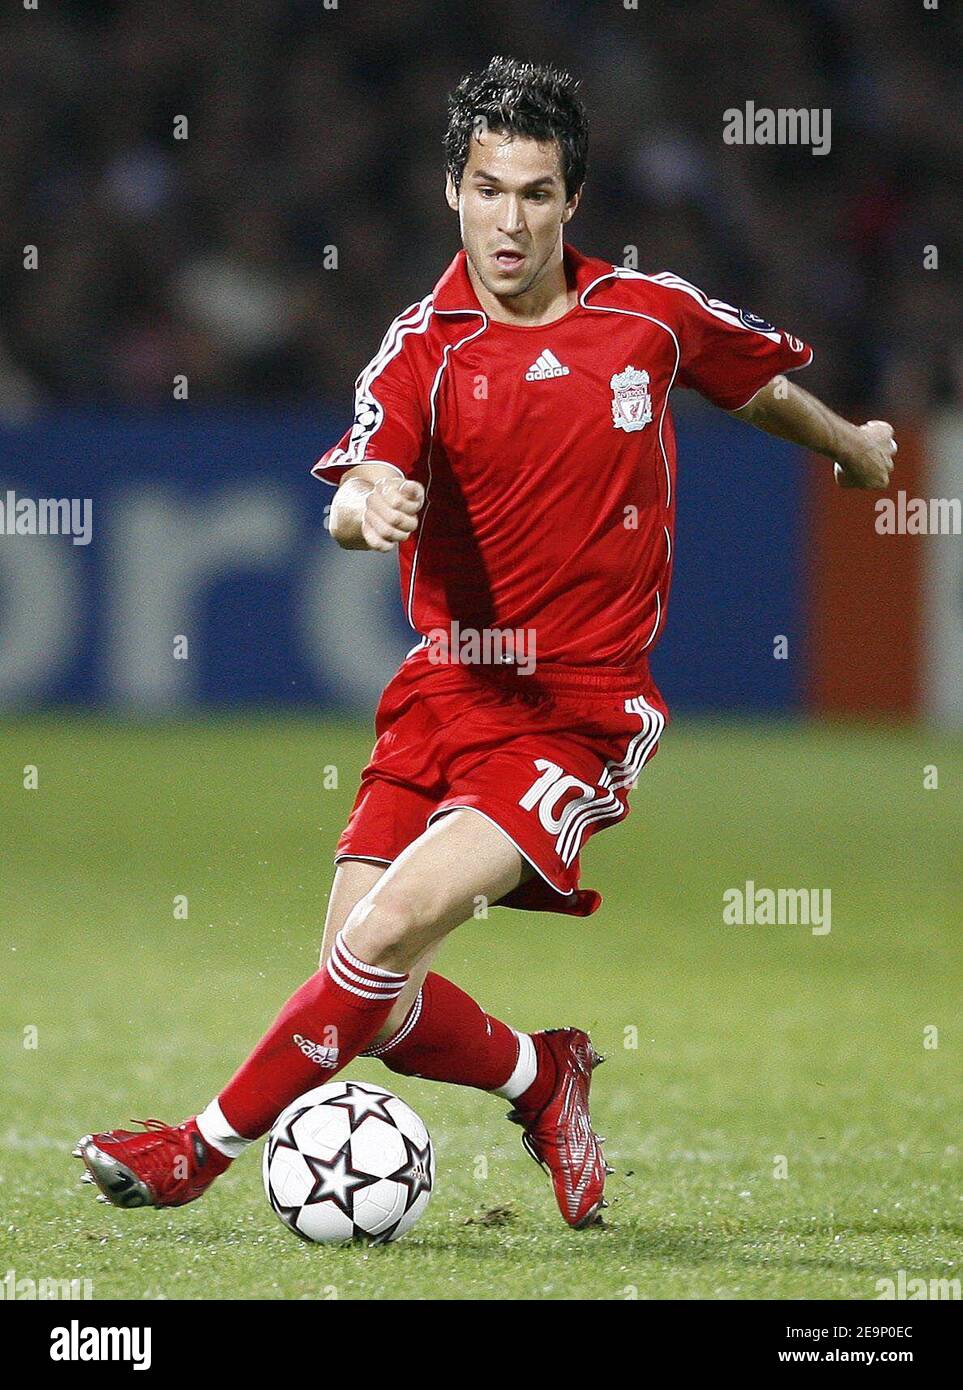 Liverpool's Luis Garcia in action during the UEFA Champions League, Group C, Girondins de Bordeaux vs Liverpool FC at the Stade Chaban-Delmas in Bordeaux, France on October 18, 2006. Liverpool won 1-0. Photo by Christian Liewig/ABACAPRESS.COM Stock Photo